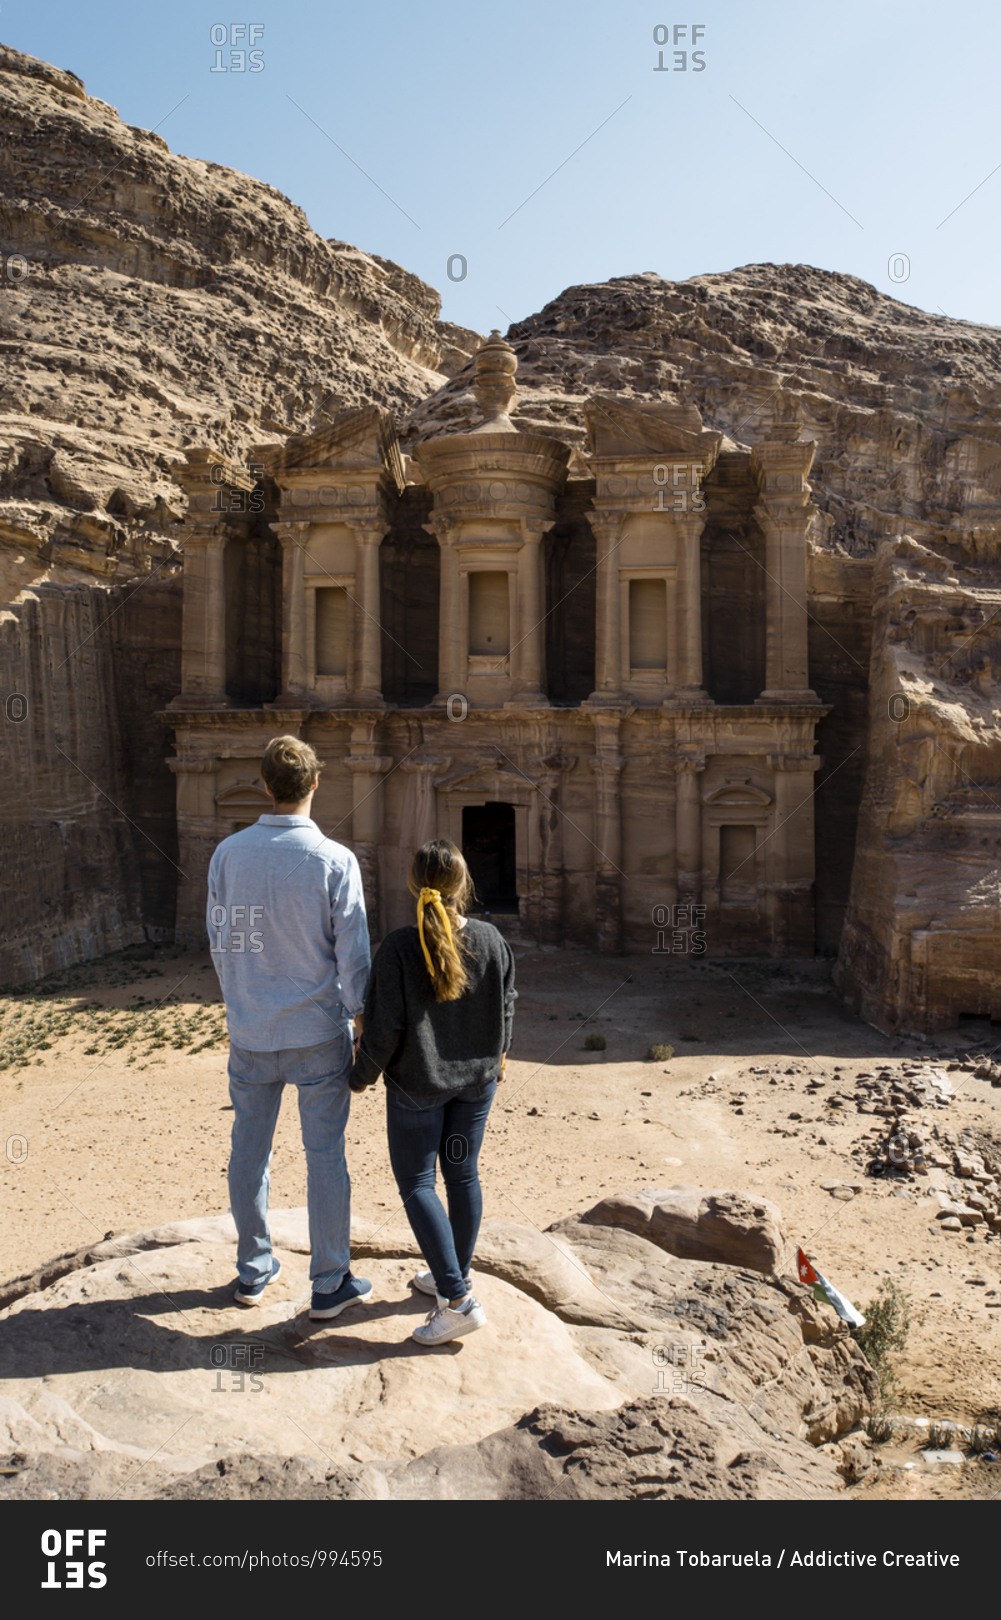 Back view of traveling couple holding hands standing on rocky hill while admiring amazing scenery of aged monastery in Jordan